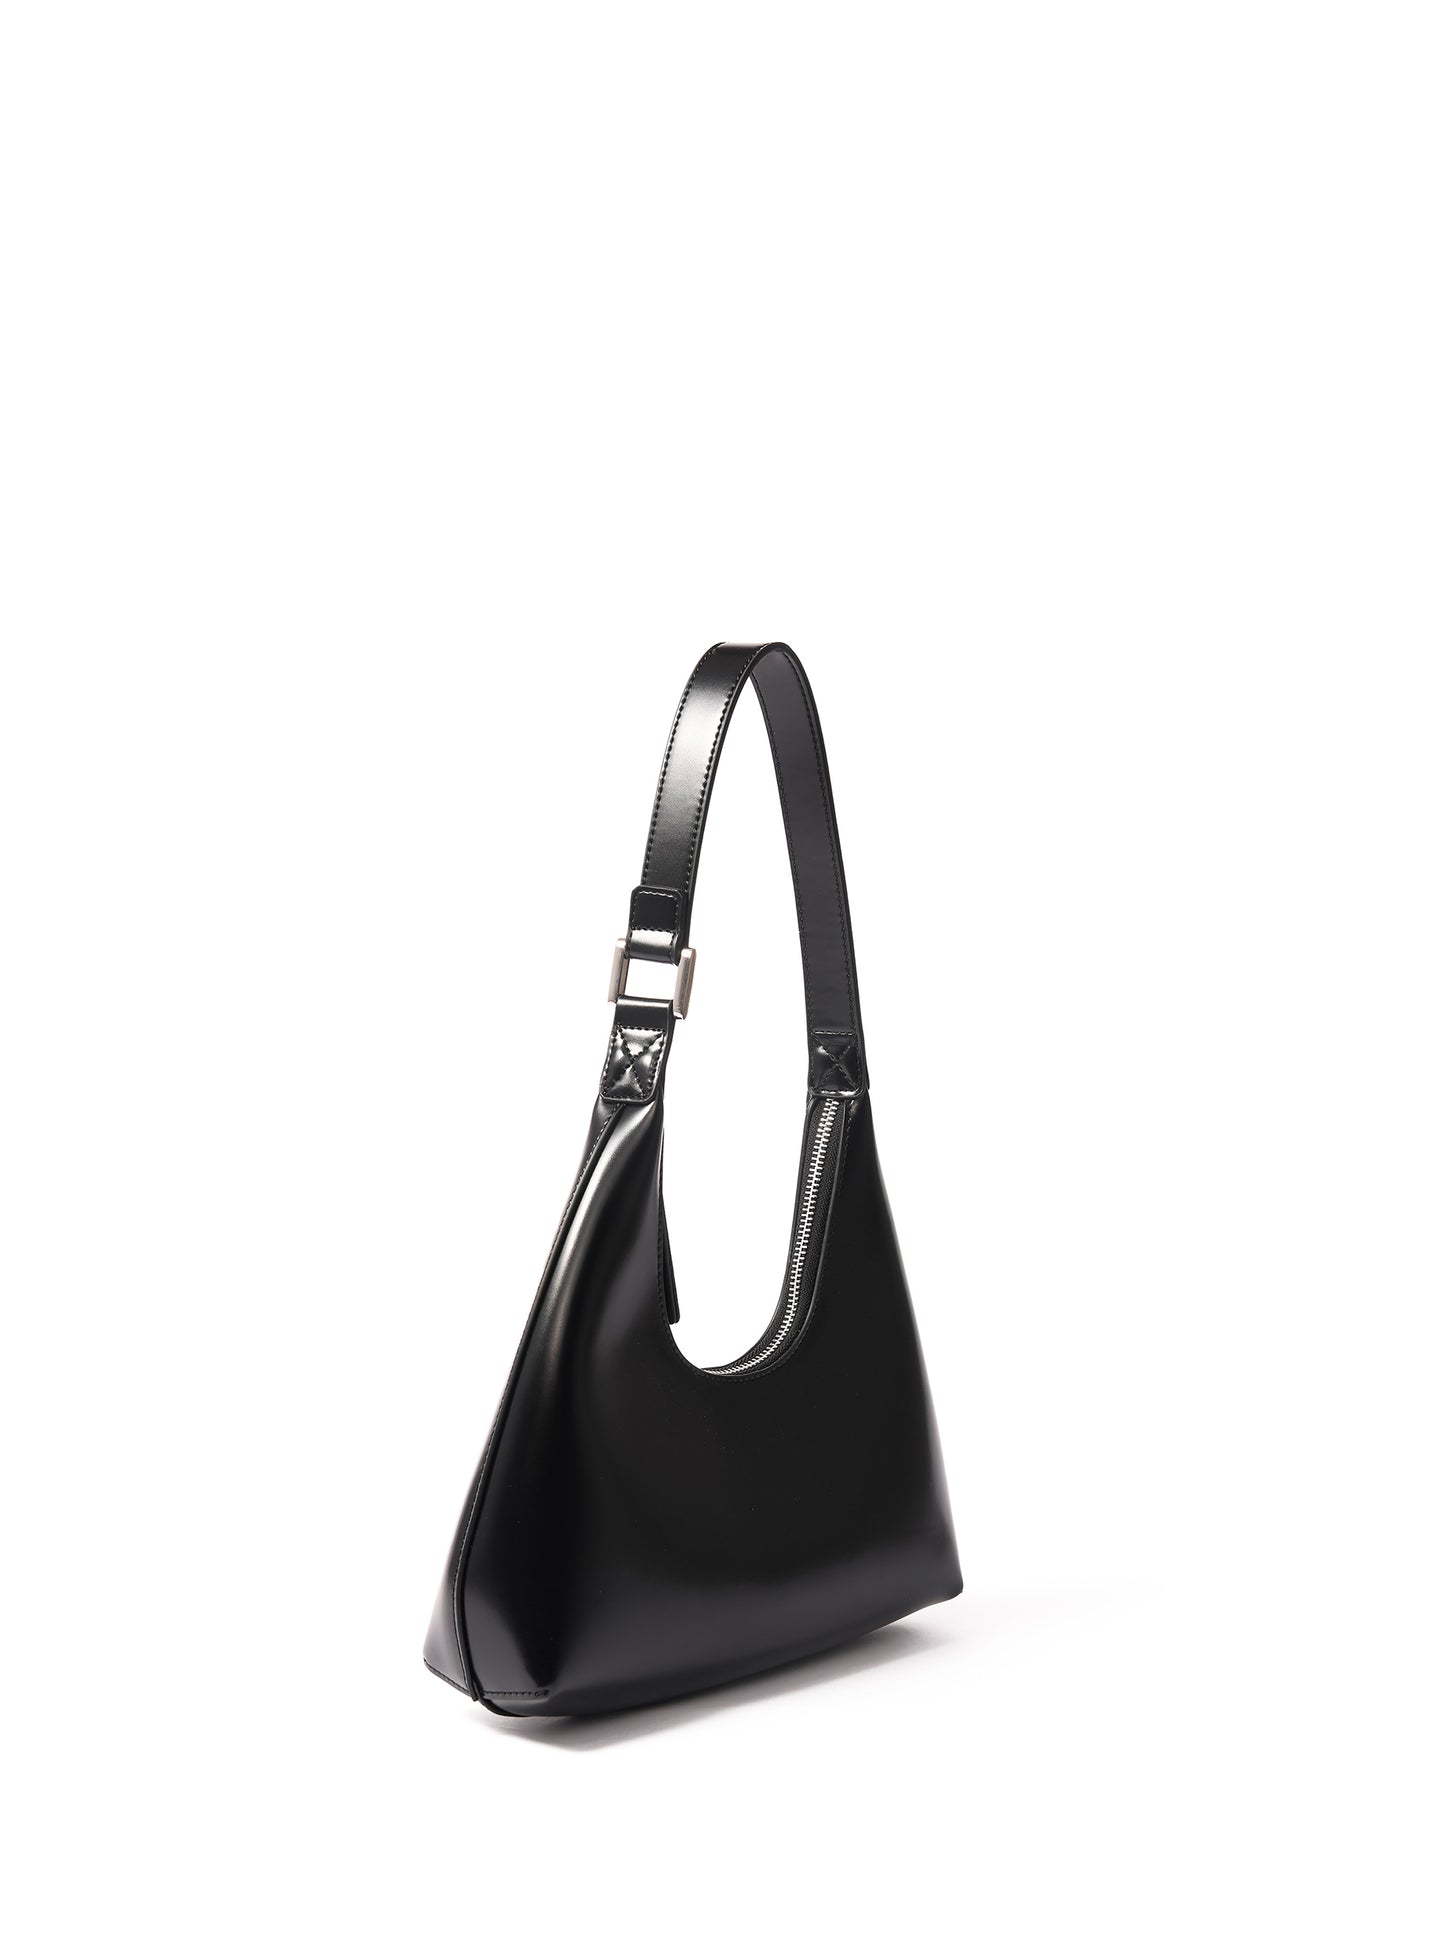 Alexia Bag in Smooth Leather, Black